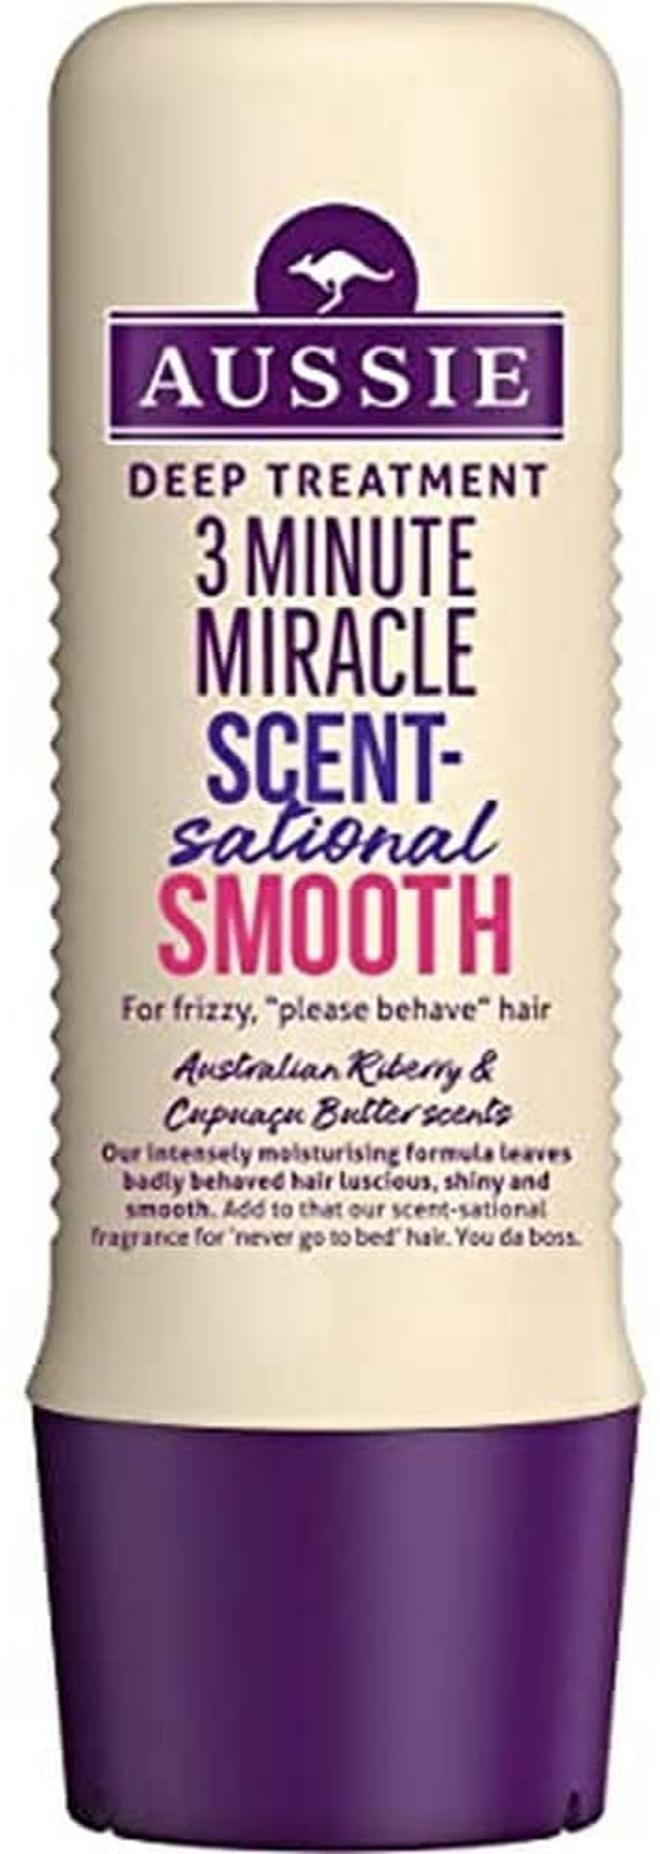 Deep Treatment 3 Minute Miracle Scent Sational Smooth de Aussi